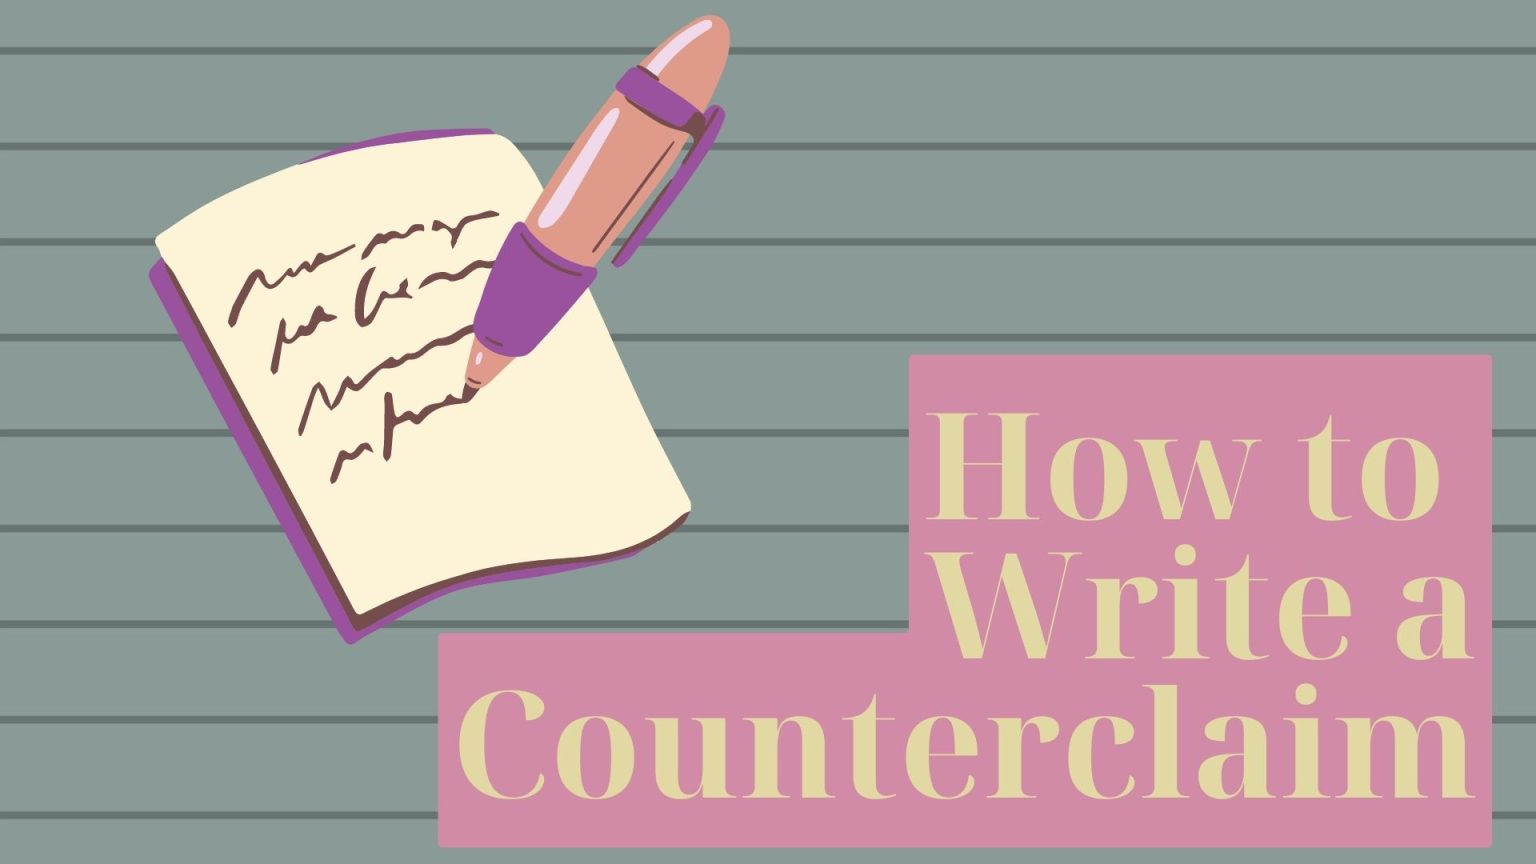 what does counterclaim mean in a essay